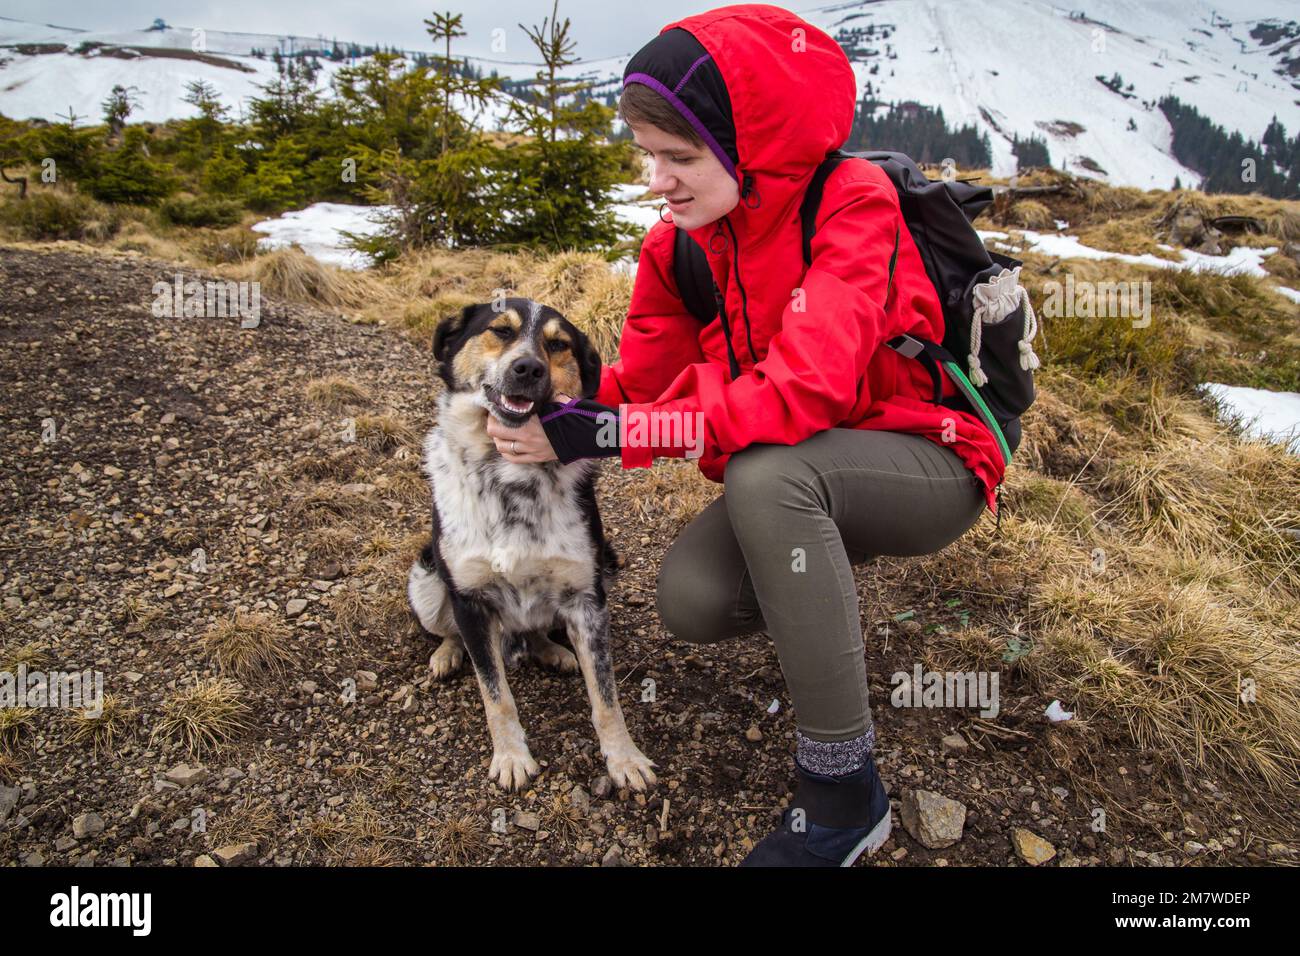 Woman scratching dog at highland scenic photography Stock Photo